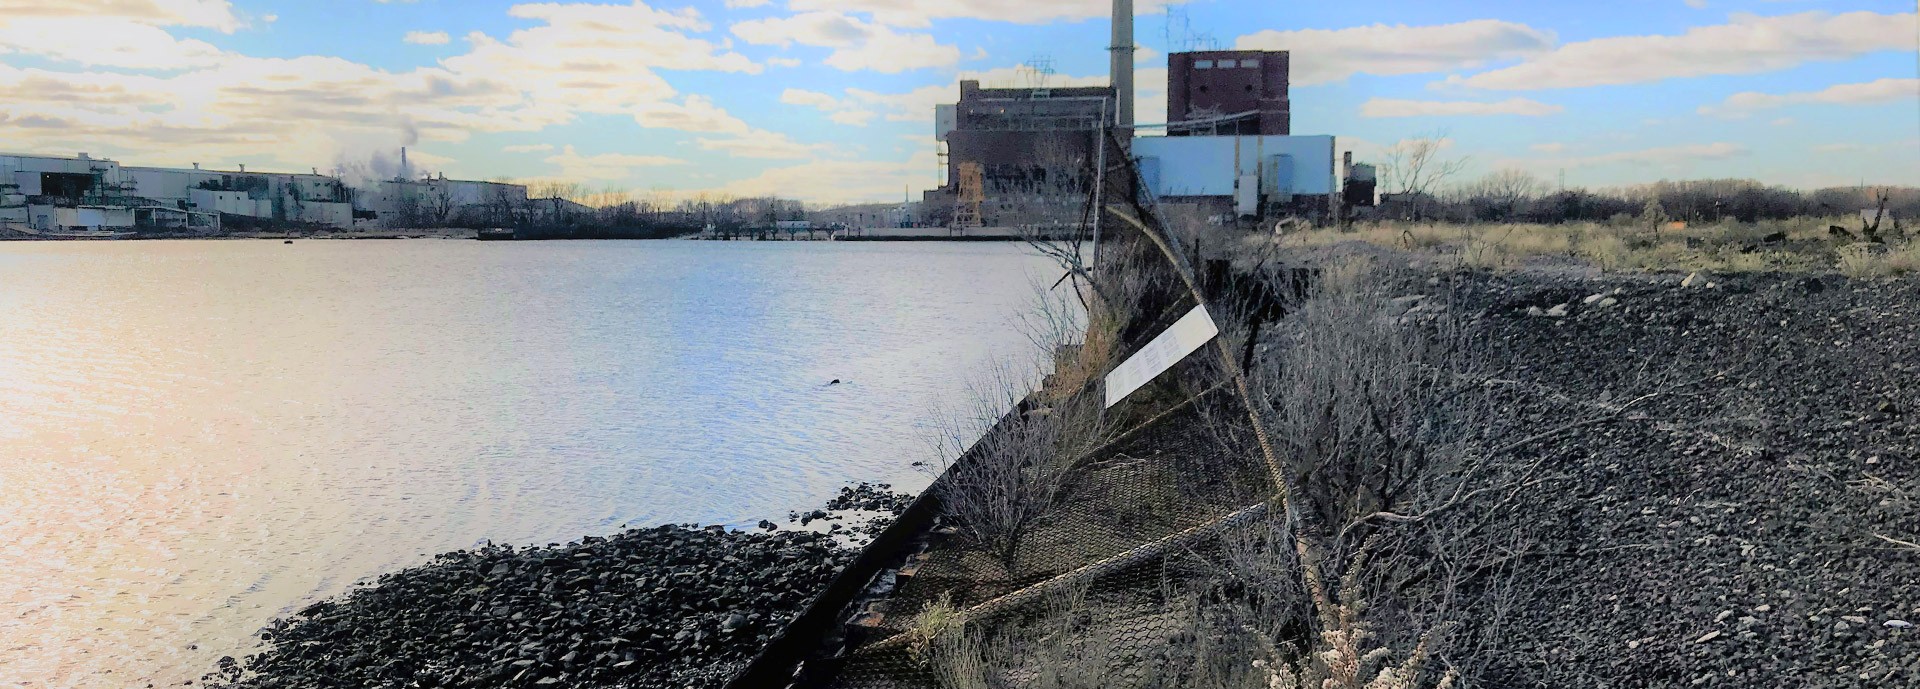 south bulkhead on shoreline with downed chain link fence, water on left and building in background and grasses on right